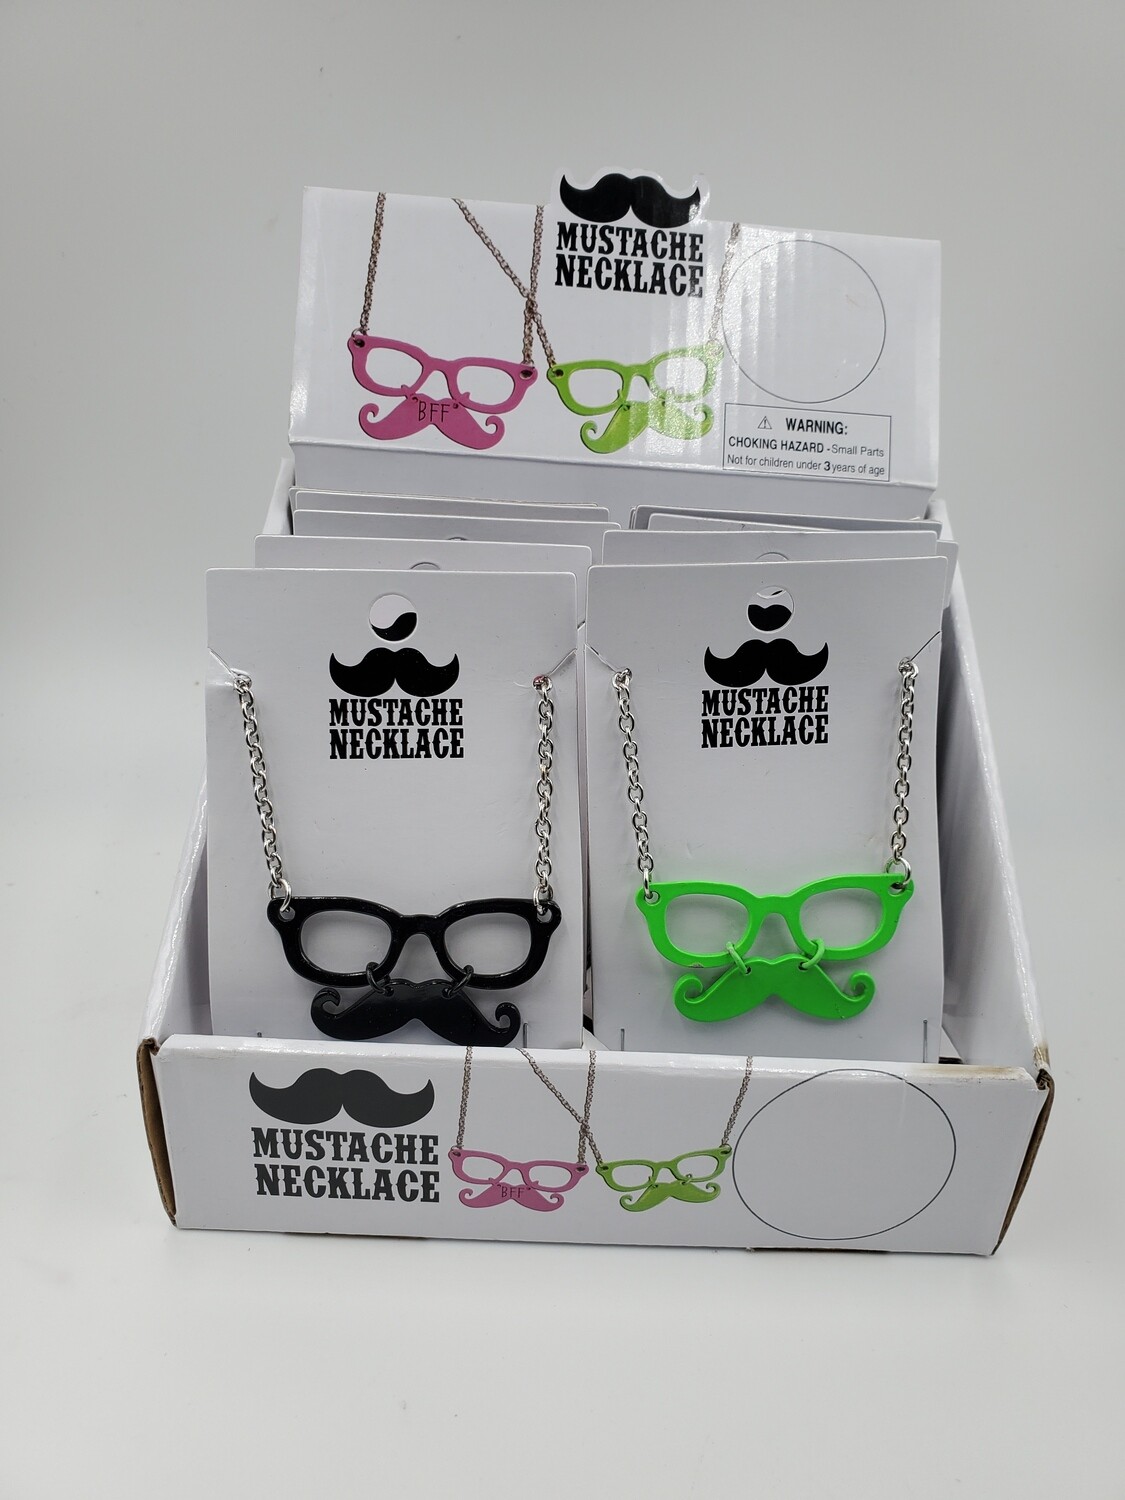 Display: Mustach Necklace